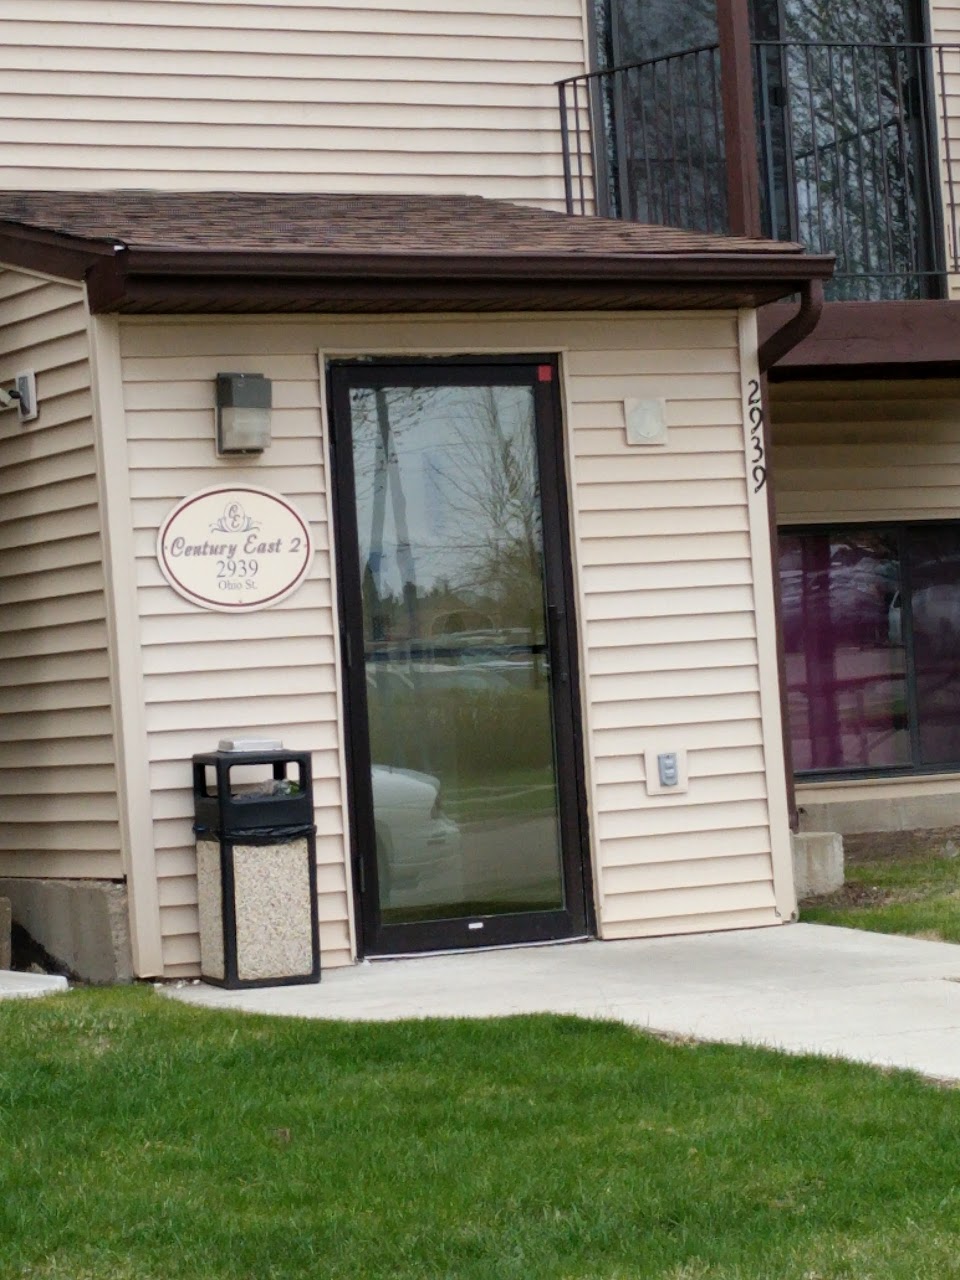 Photo of CENTURY EAST APTS I. Affordable housing located at 2909 OHIO ST BISMARCK, ND 58503